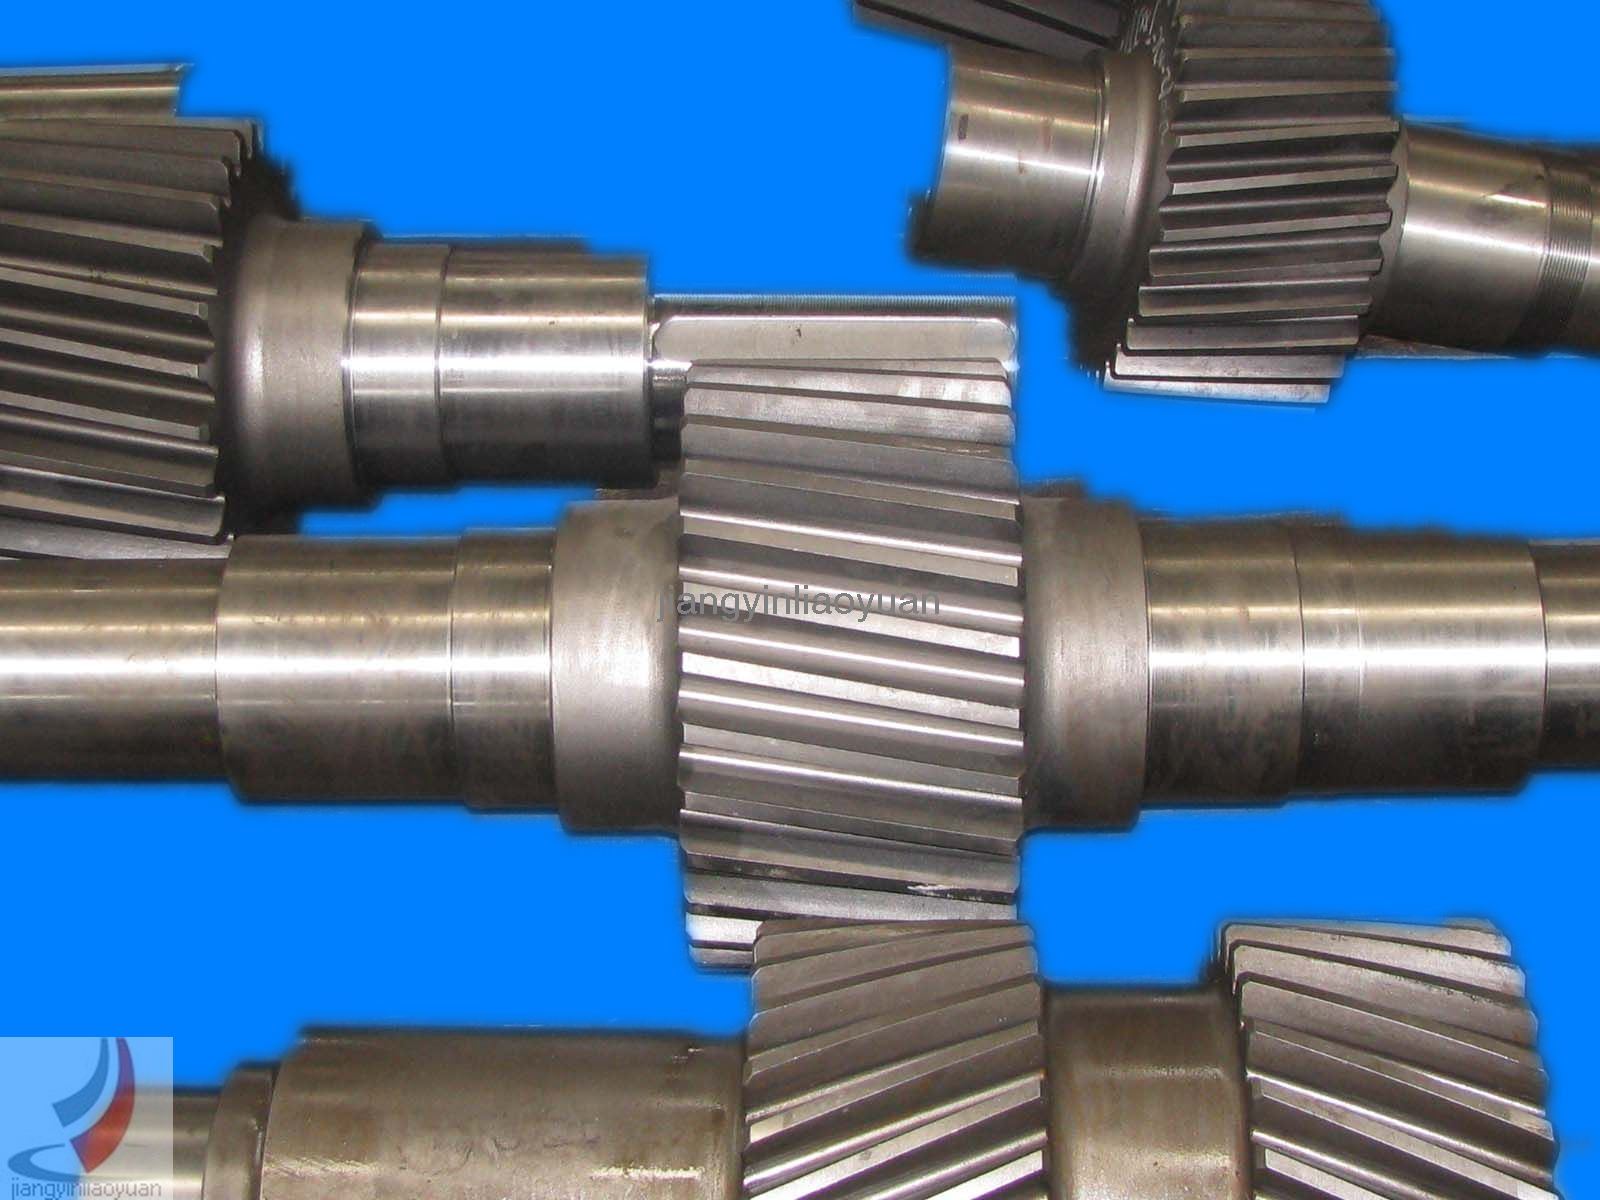 Forged Gear Shafts